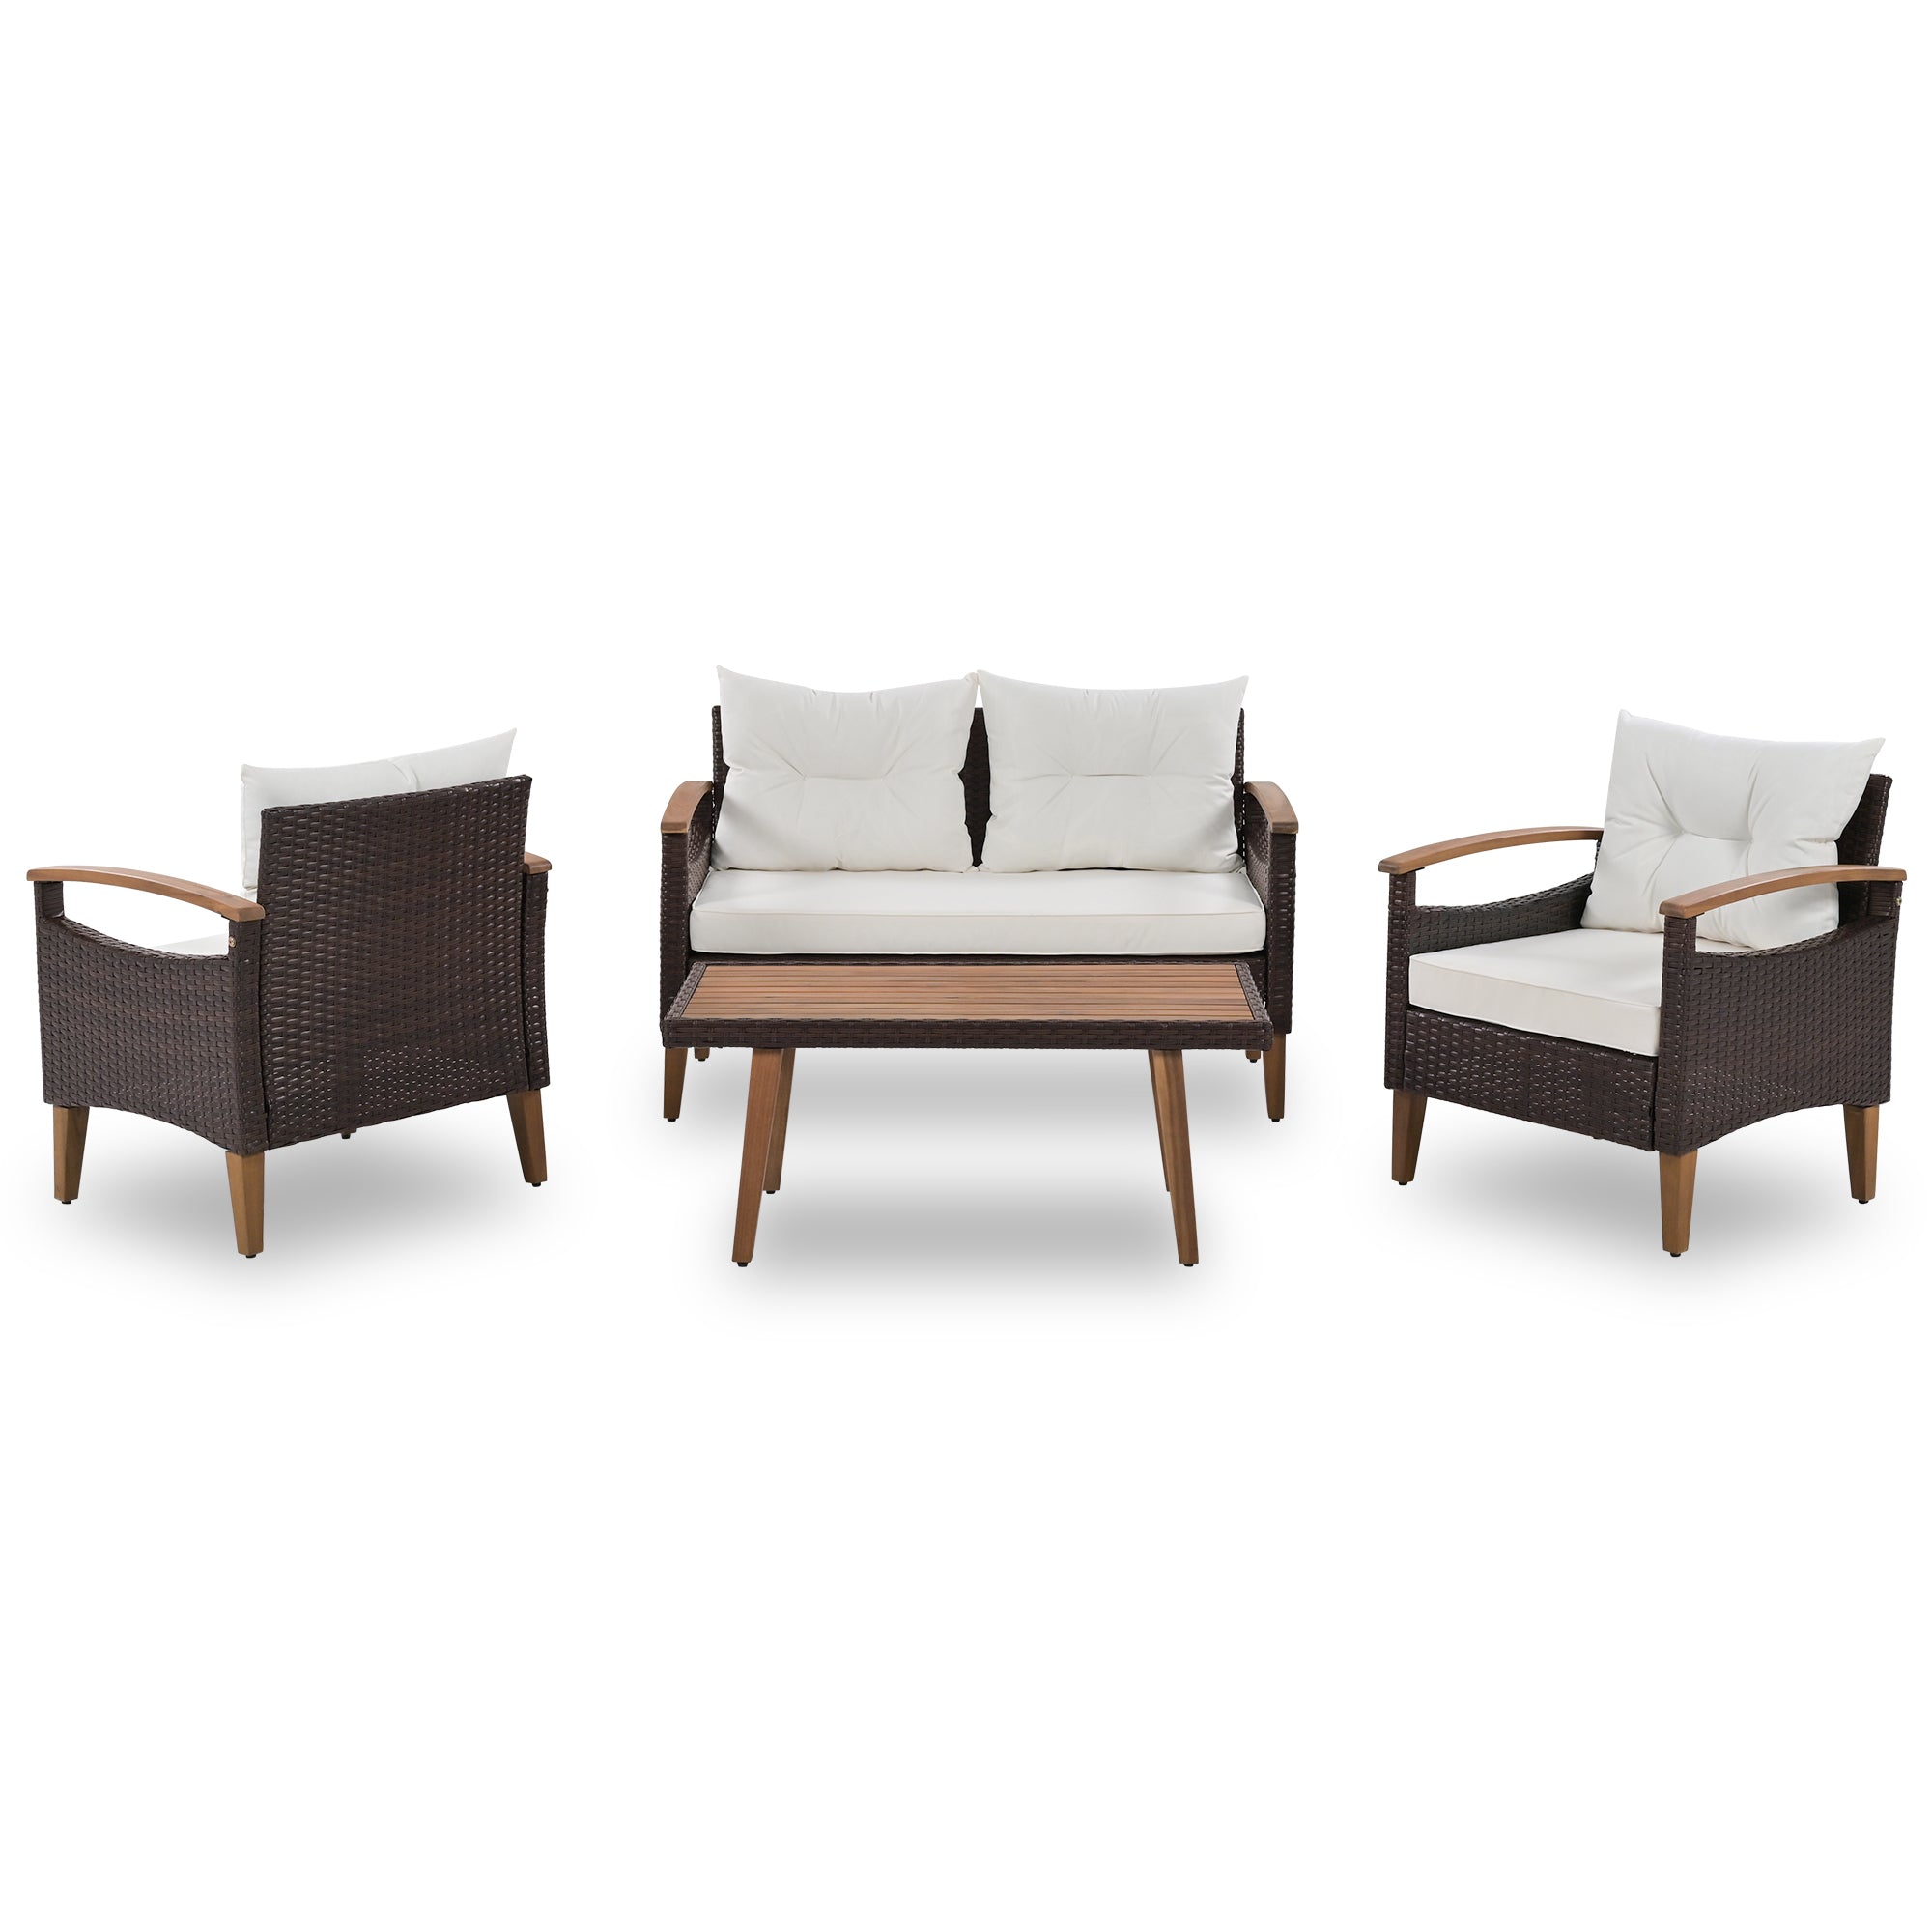 4-Piece Garden Furniture,  Patio Seating Set, PE Rattan Outdoor Sofa Set, Wood Table and Legs - Brown and Beige